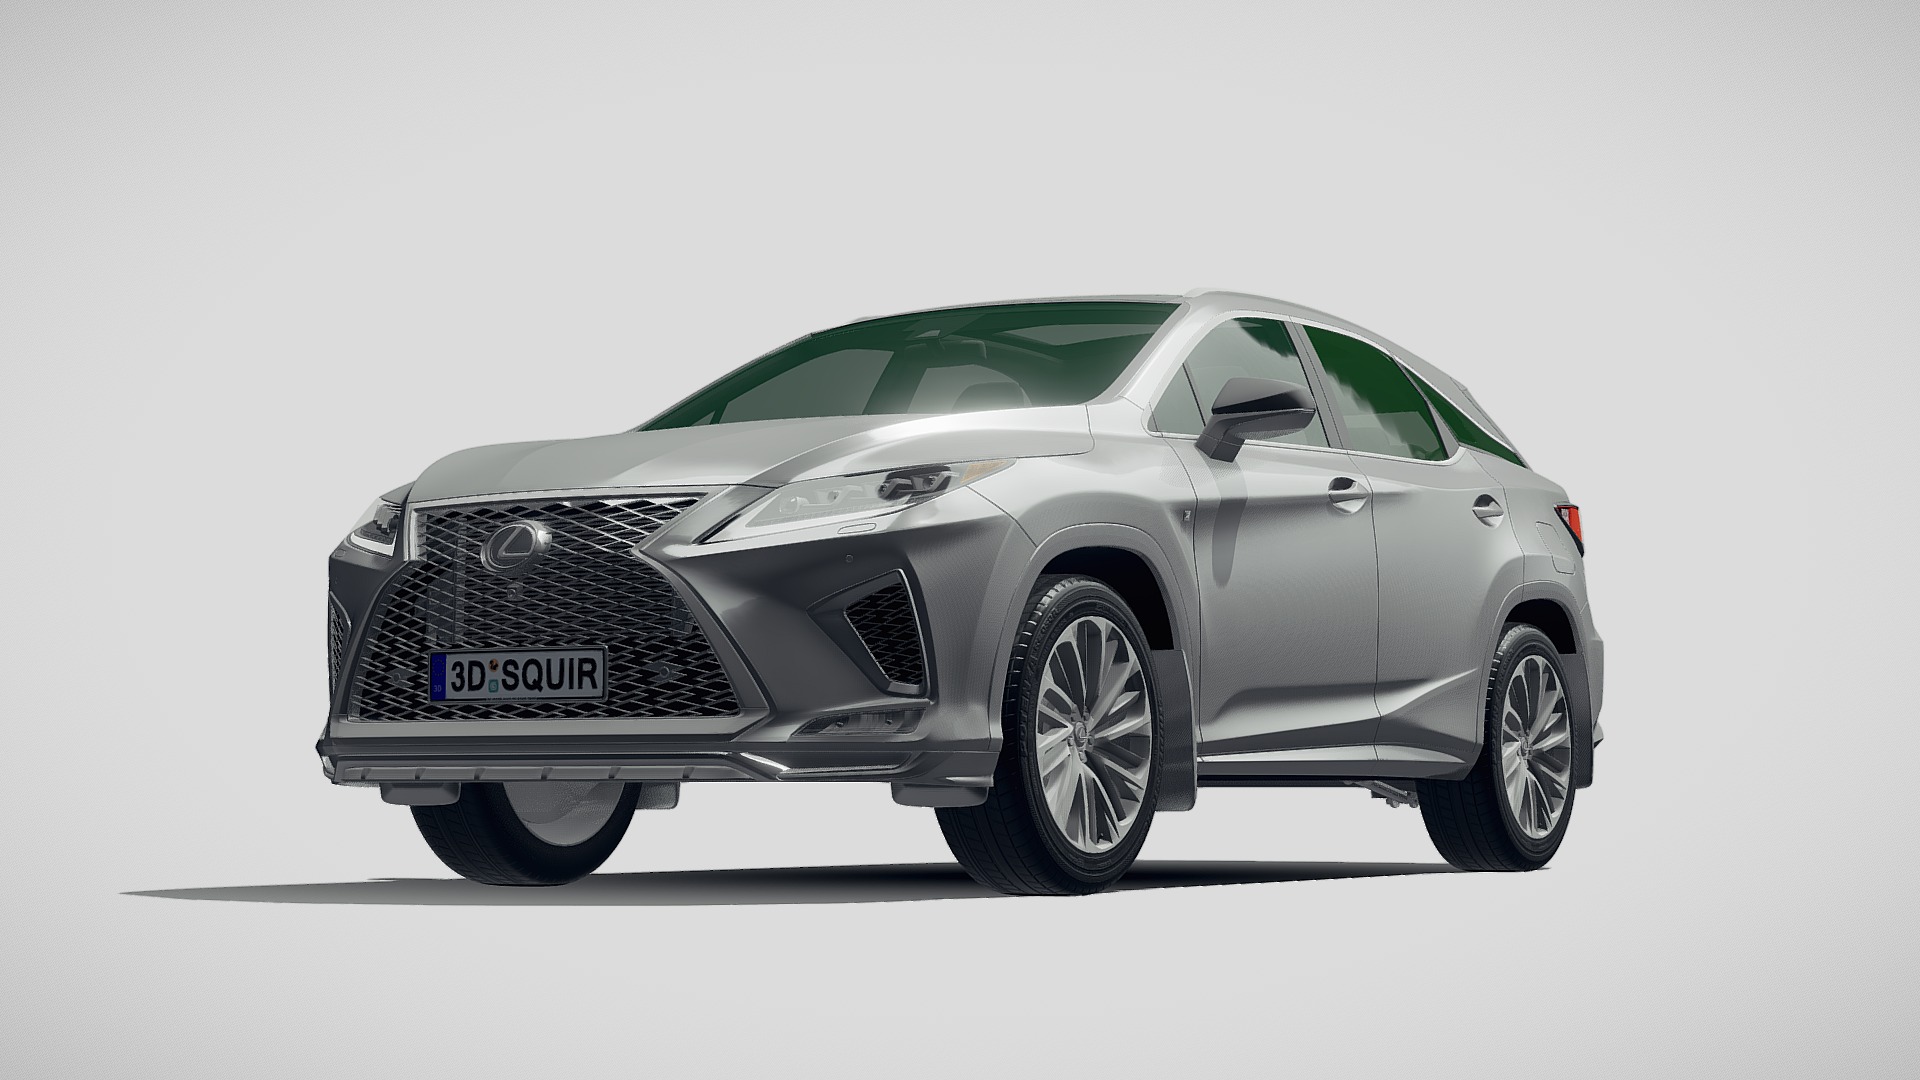 3D model Lexus RX Fsport 2020 - This is a 3D model of the Lexus RX Fsport 2020. The 3D model is about a silver car with a black roof.